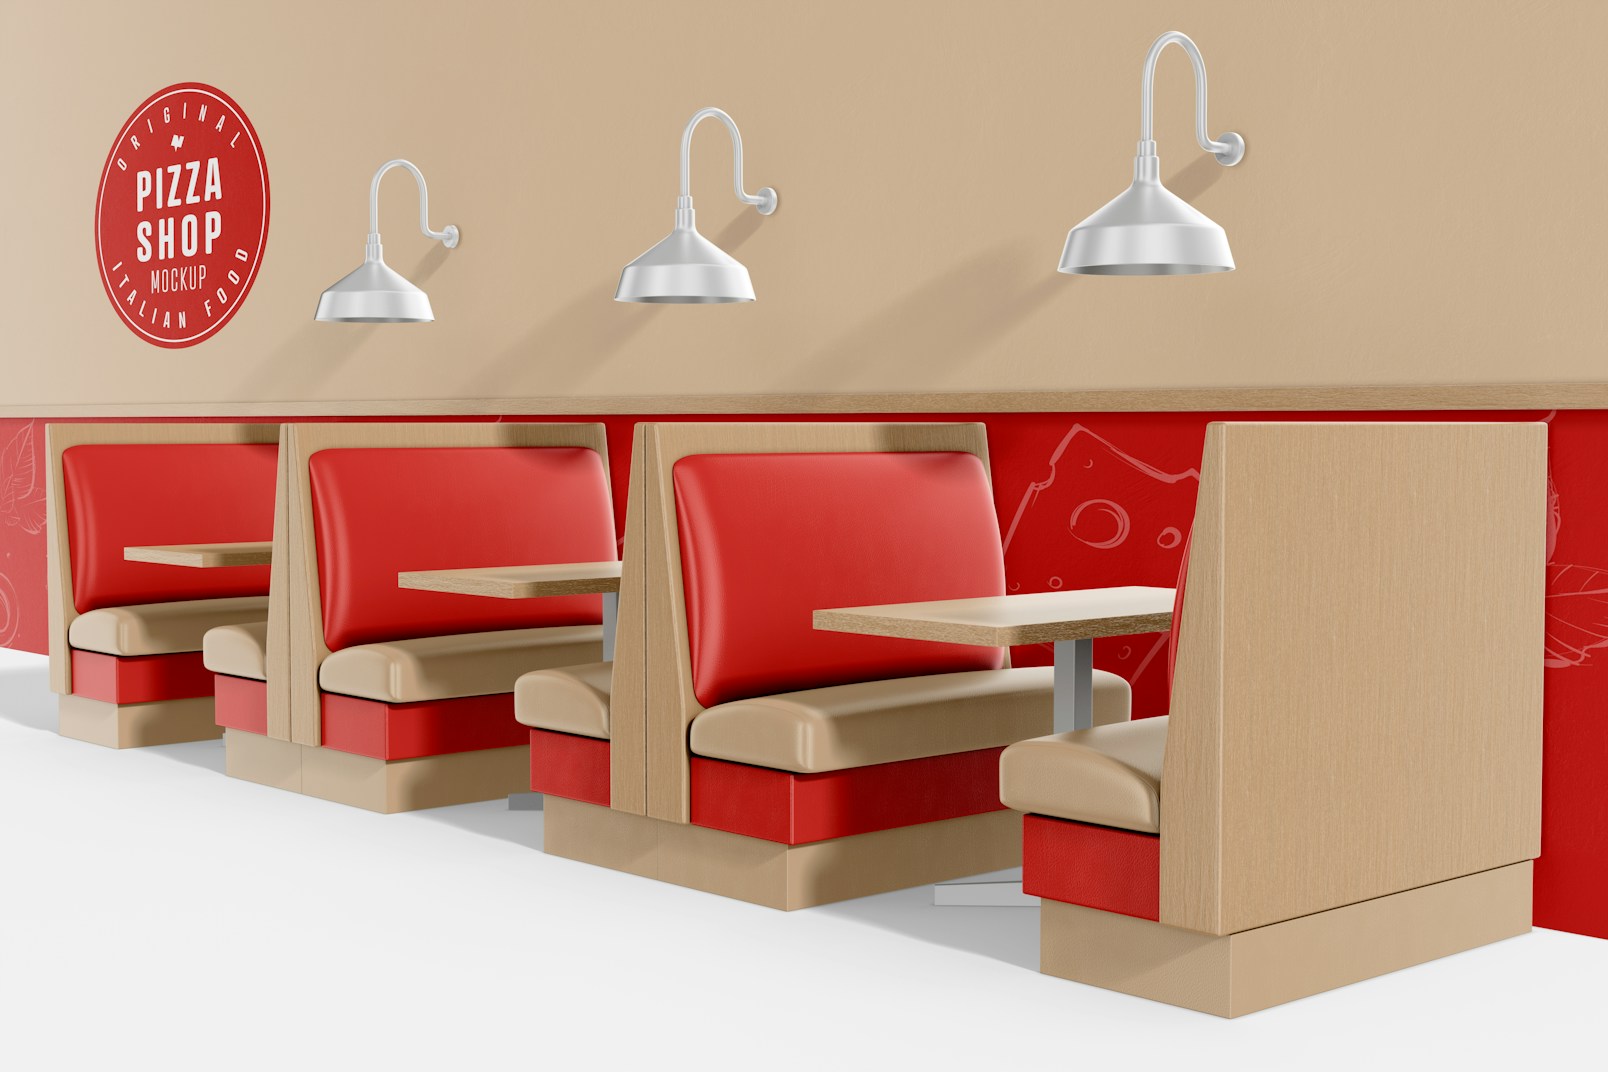 Pizza Shop Chair and Table Scene Mockup, Left View